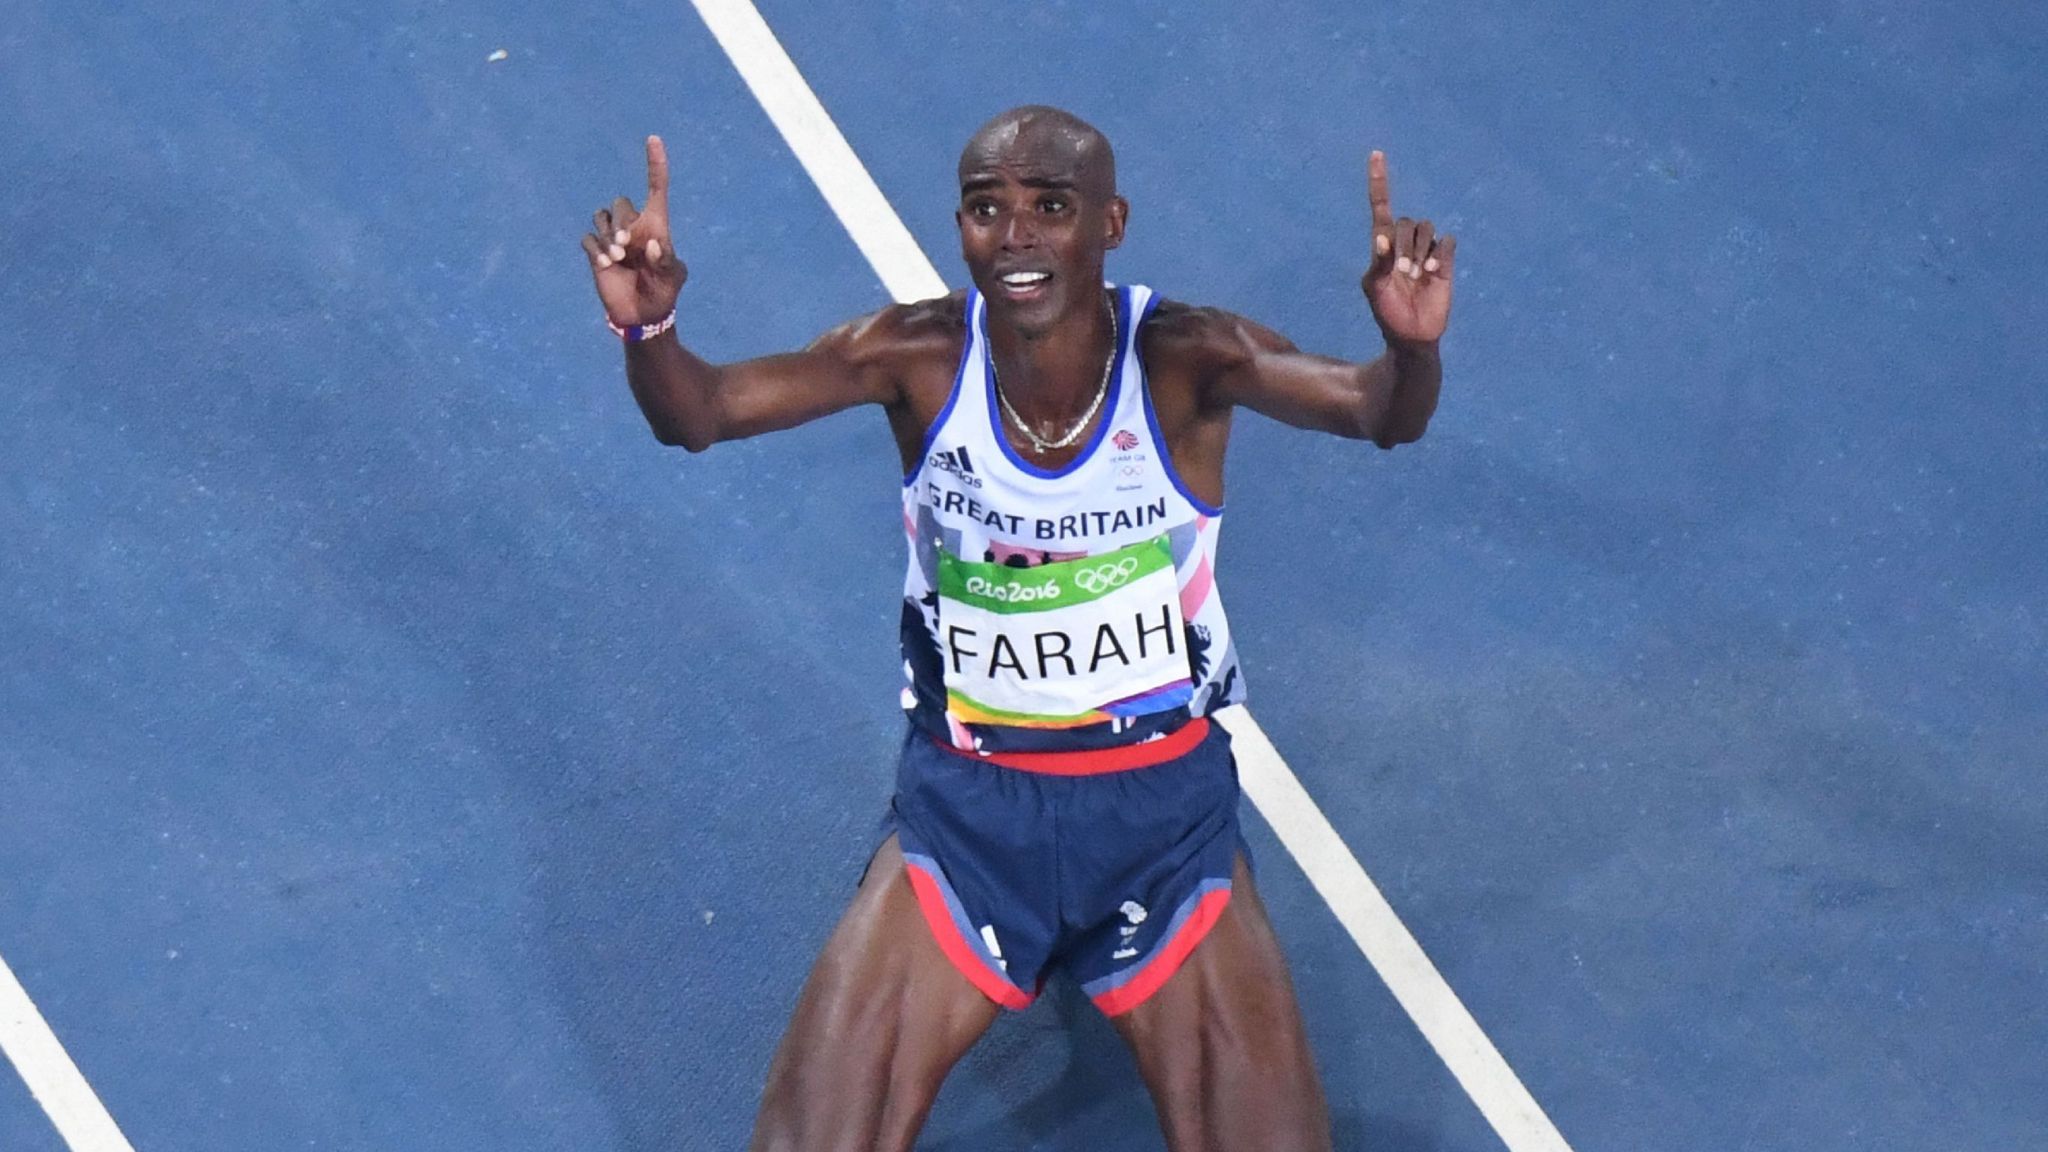 Mo Farah 'Needs World Record' To Seal His Place Among All Time